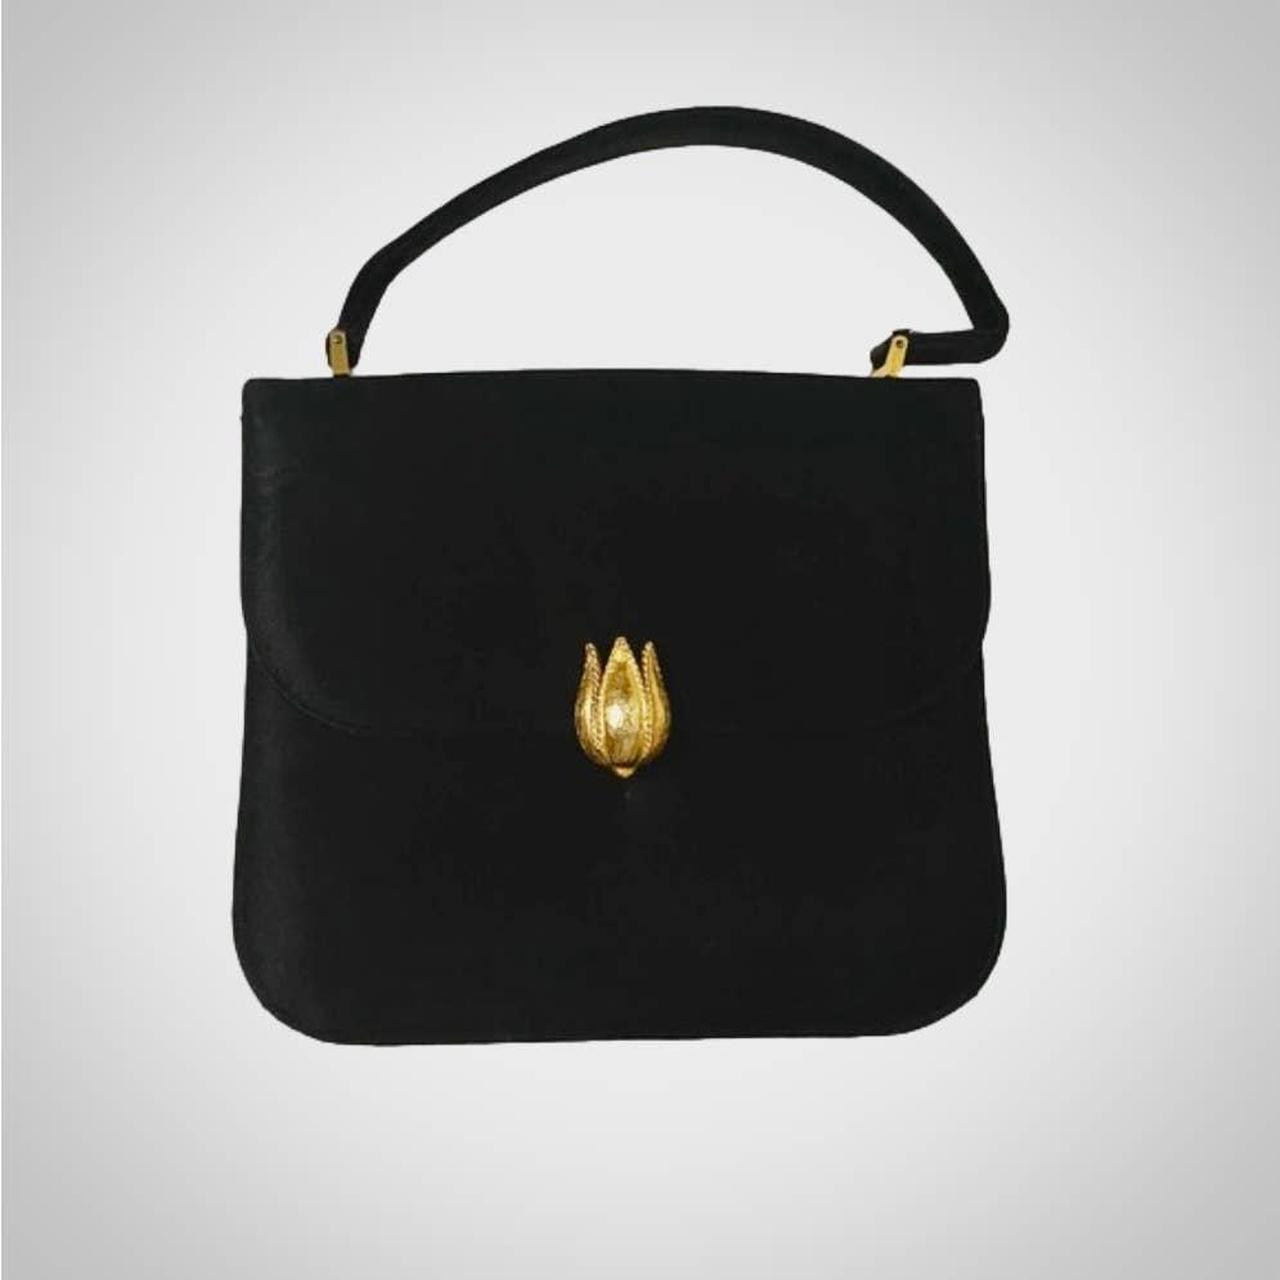 American Vintage Women's Going Out Bag - Black